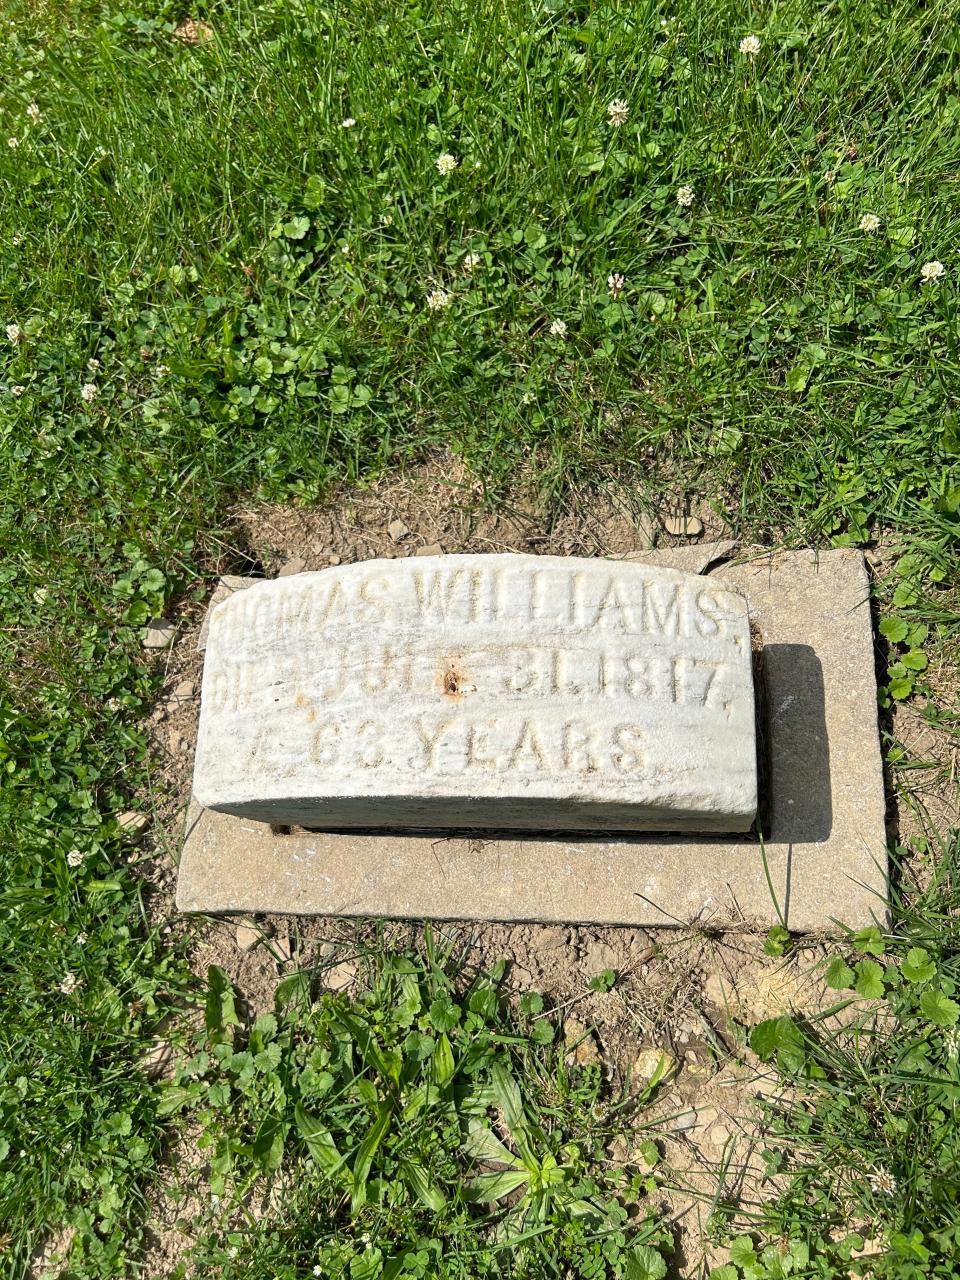 The gravesite of Thomas Williams, a member of the Boston Tea Party and a prominent figure in American history, at Forest Hill Cemetery in Utica.